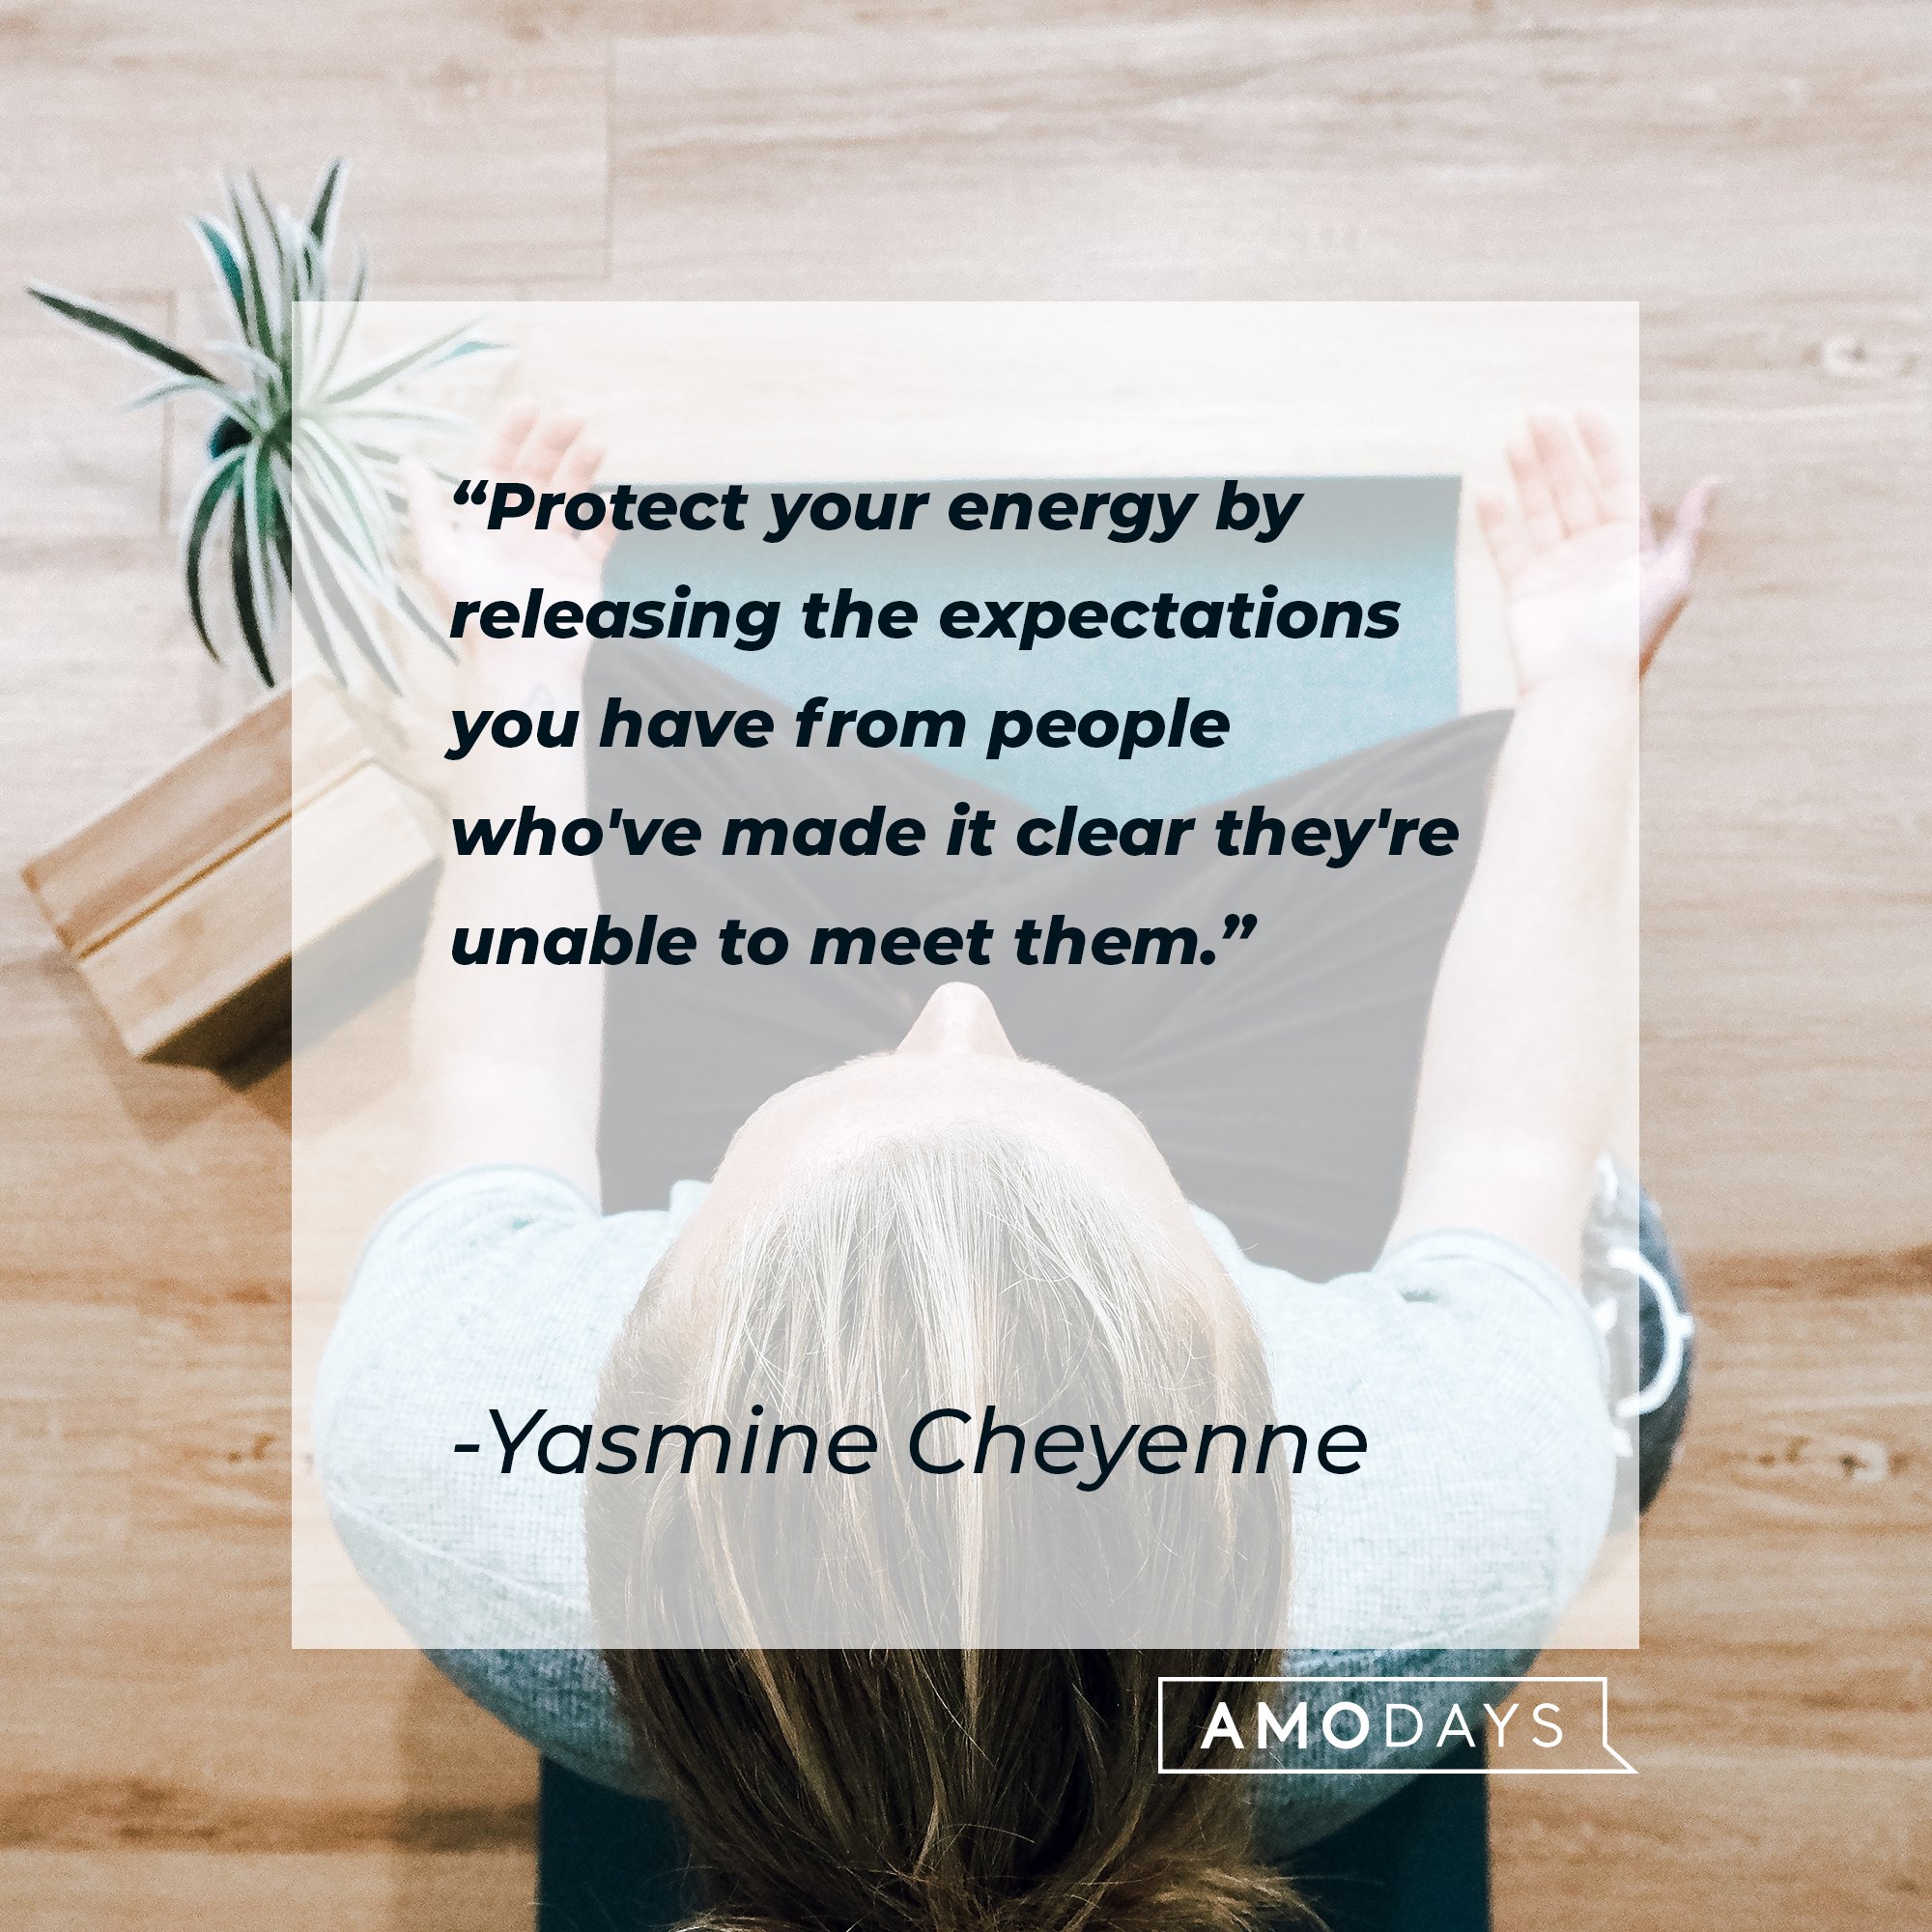 Yasmine Cheyenne’s quote: "Protect your energy by releasing the expectations you have from people who've made it clear they're unable to meet them." | Image: AmoDays